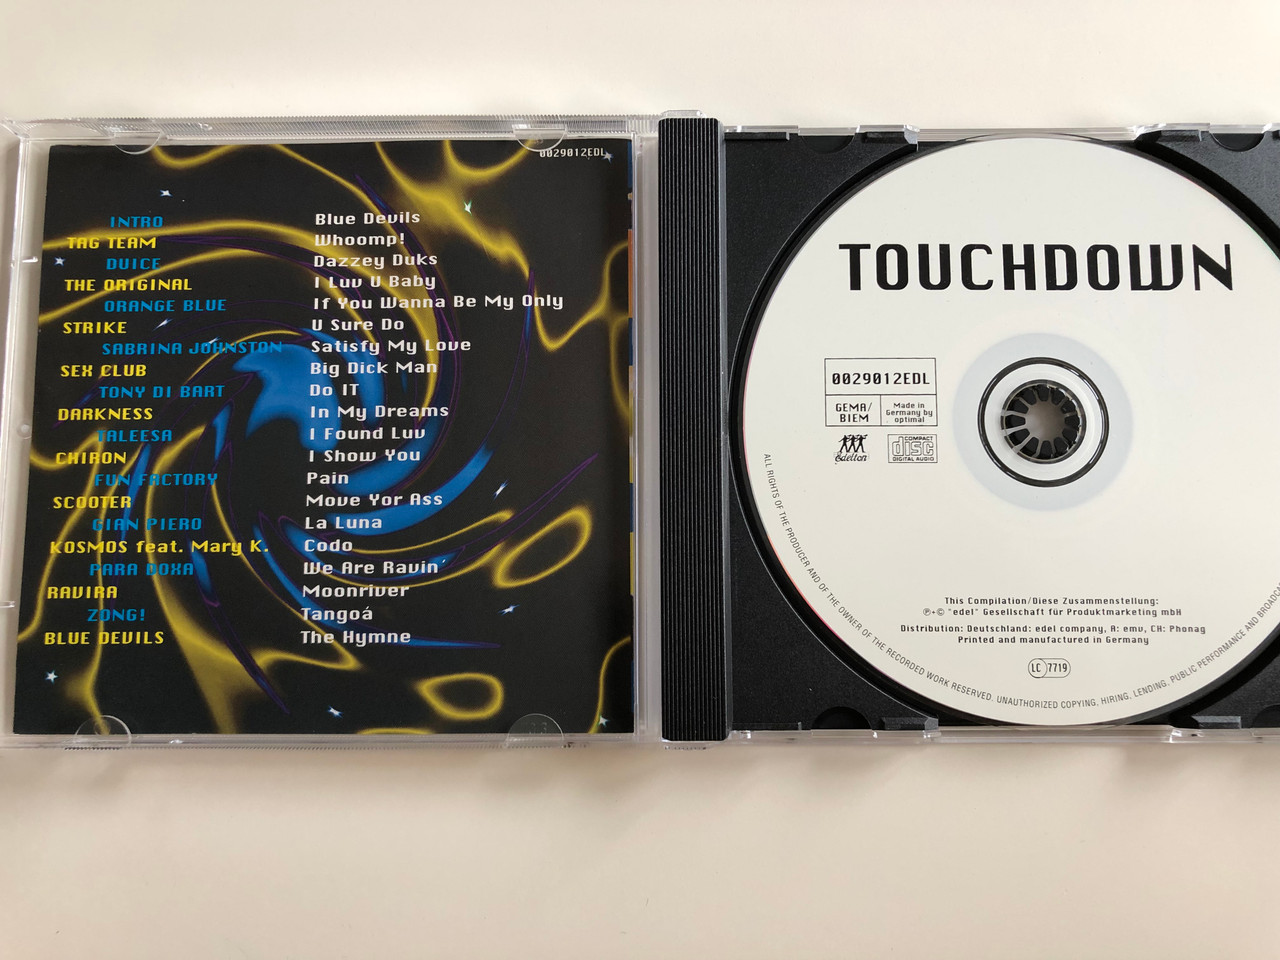 Touchdown - Fun Factory, Scooter, Tag Team, Darkness, Tony Di Bart, Orangle  Blue, Para Doxa / Only available on this compilation Blue Devils Hymne /  Audio CD 1995 - bibleinmylanguage